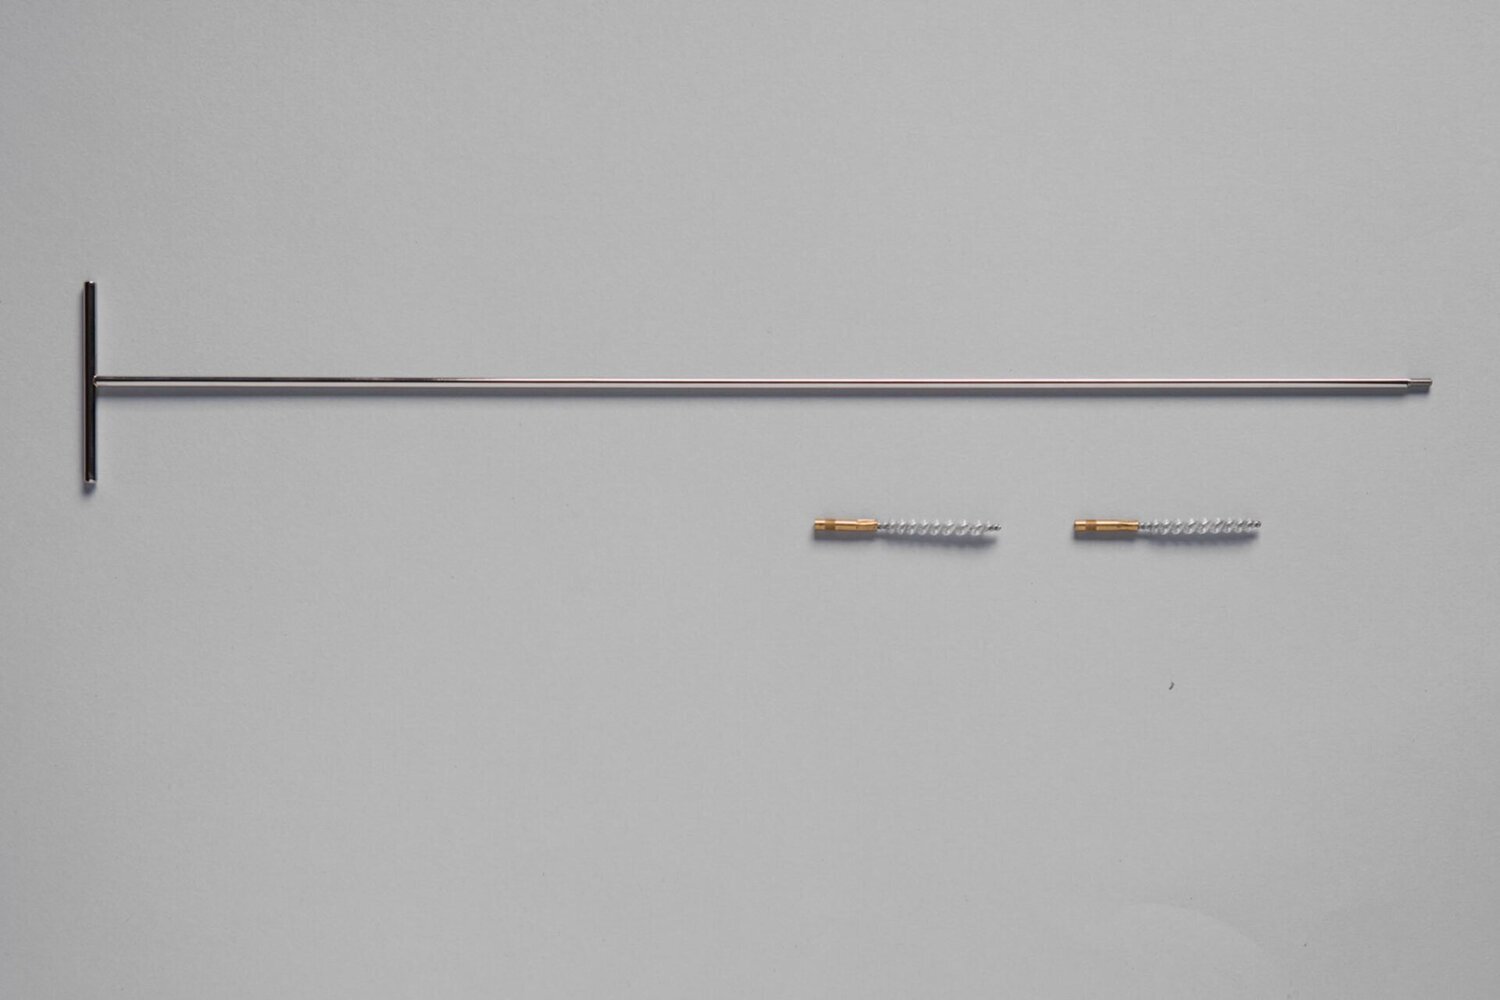 Trocar cleaning rods